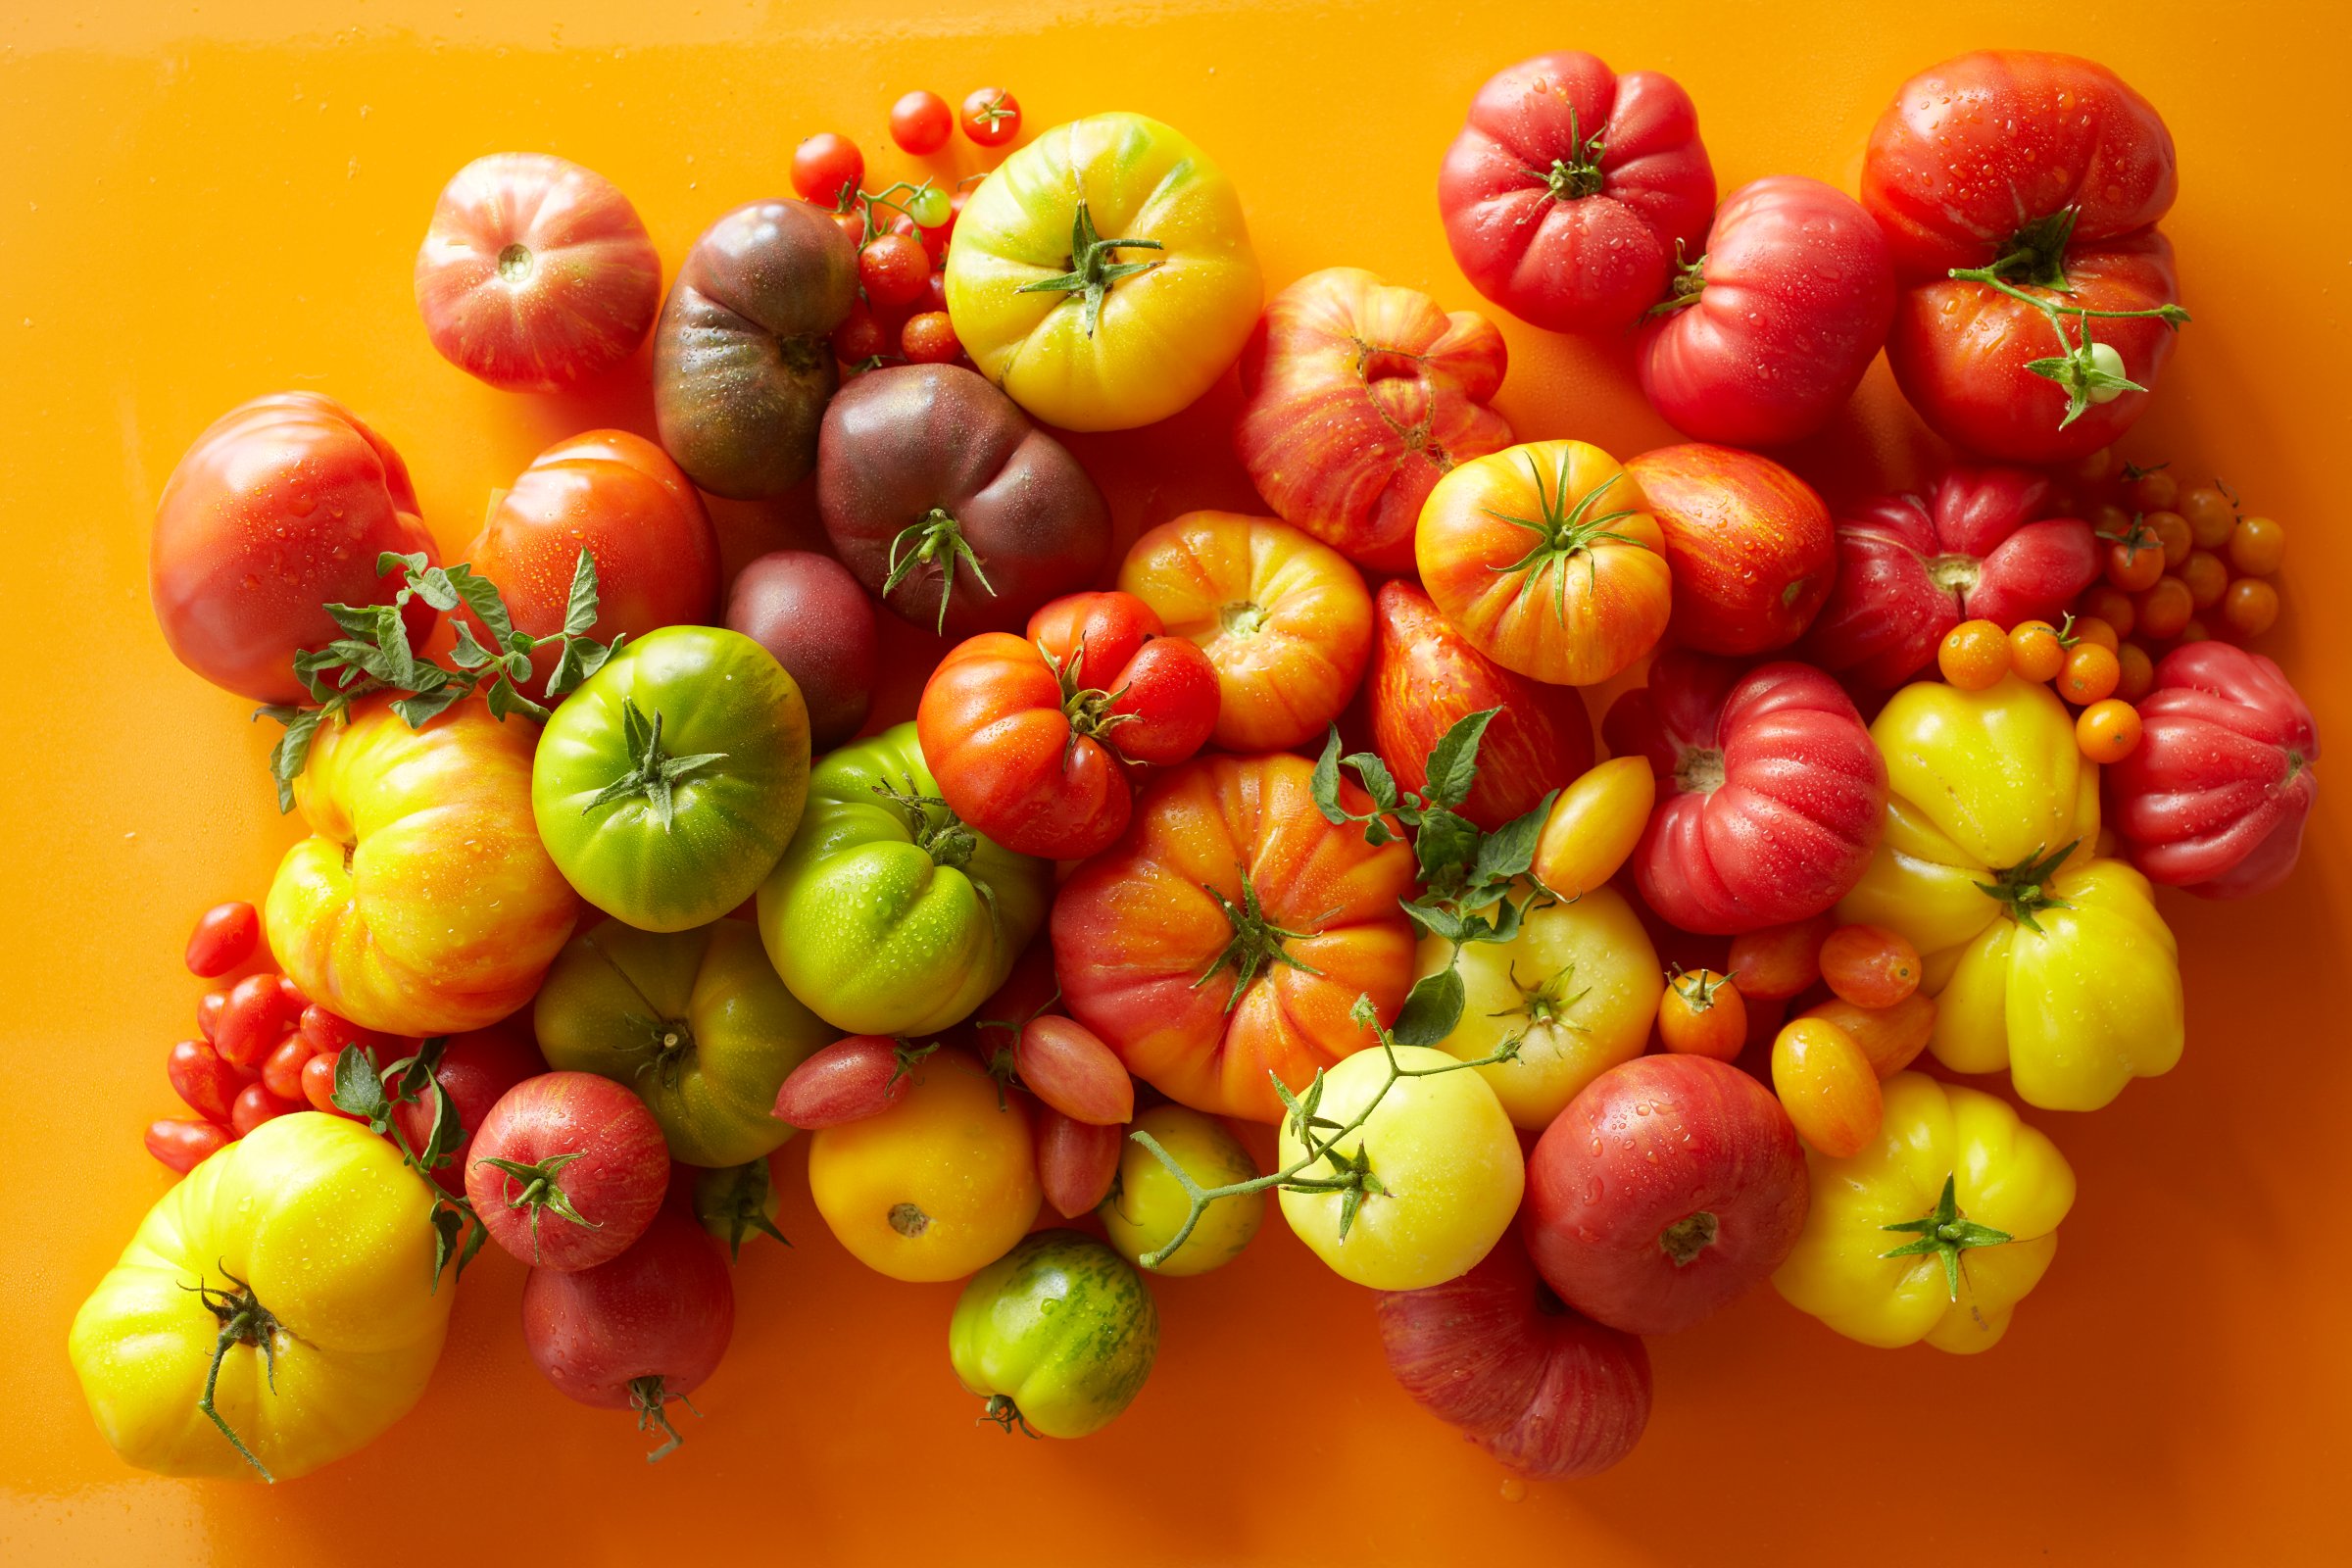 Overhead of a variety of tomatoes